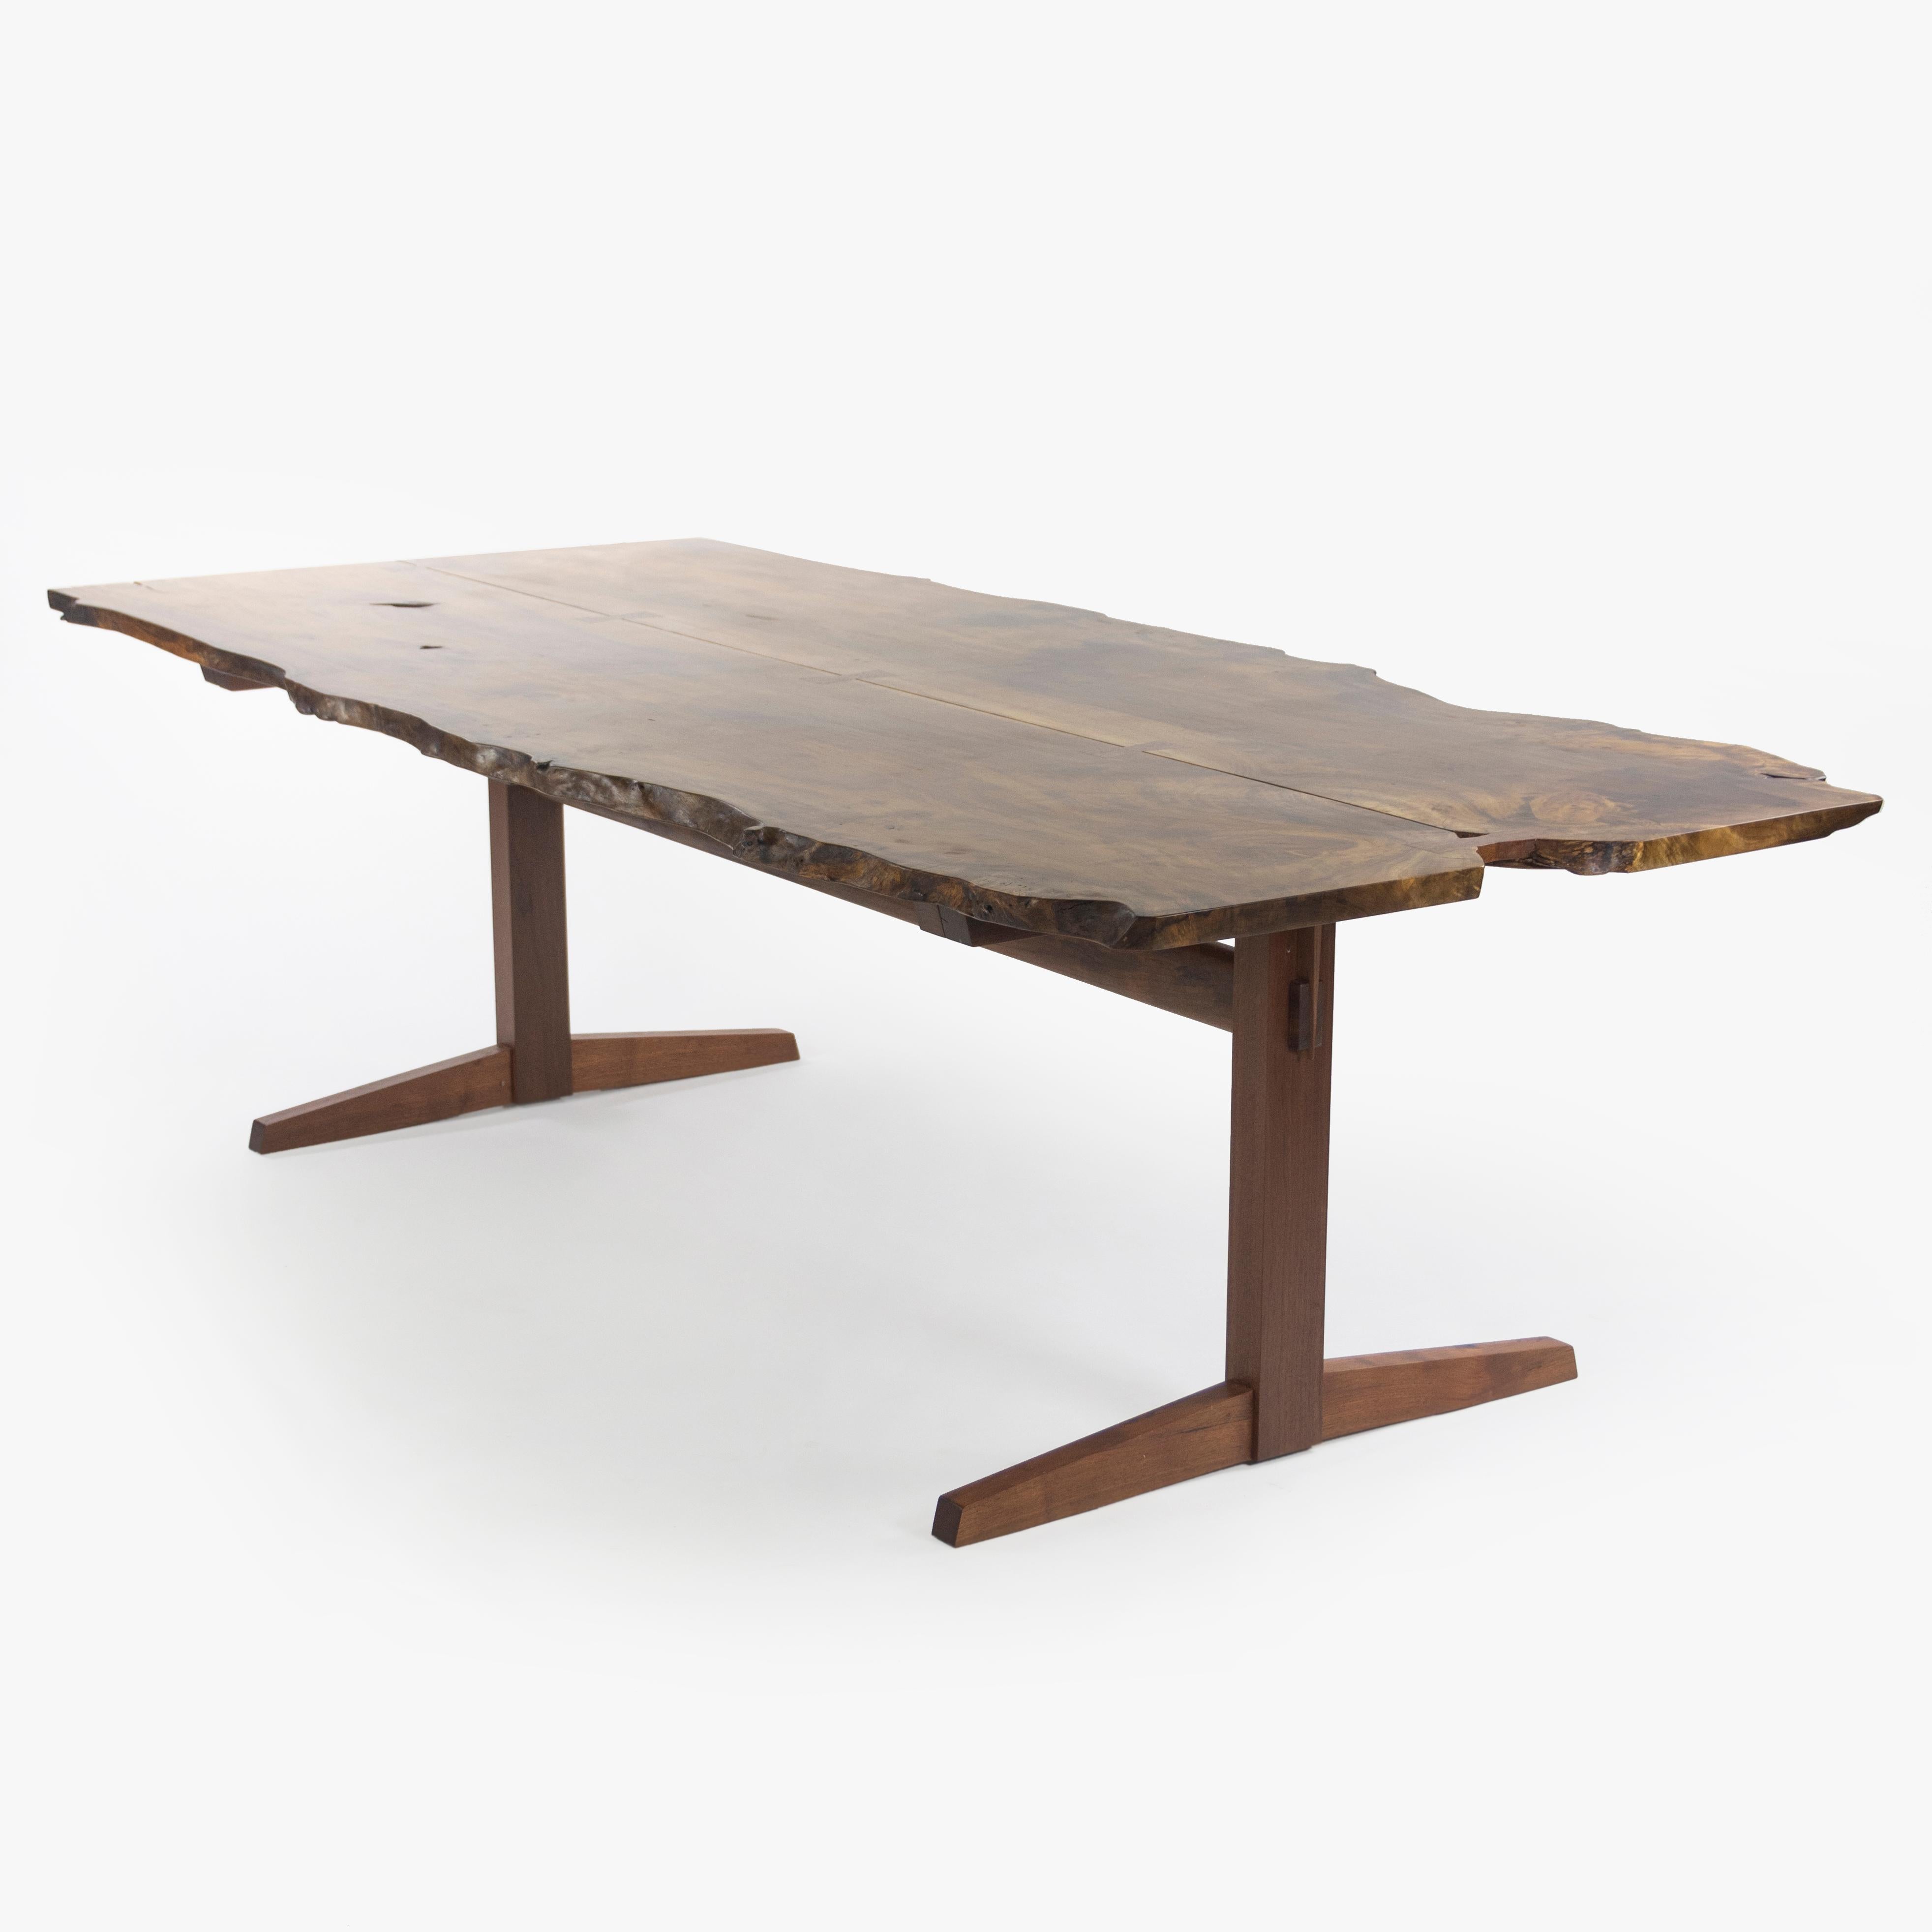 We present this Mira Nakashima trestle dining table with a book-matched Myrtle Burl top, black walnut base, and set of seven rosewood butterflies. This is a monumental work by Mira Nakashima, noting how infrequently burls such as this are used in